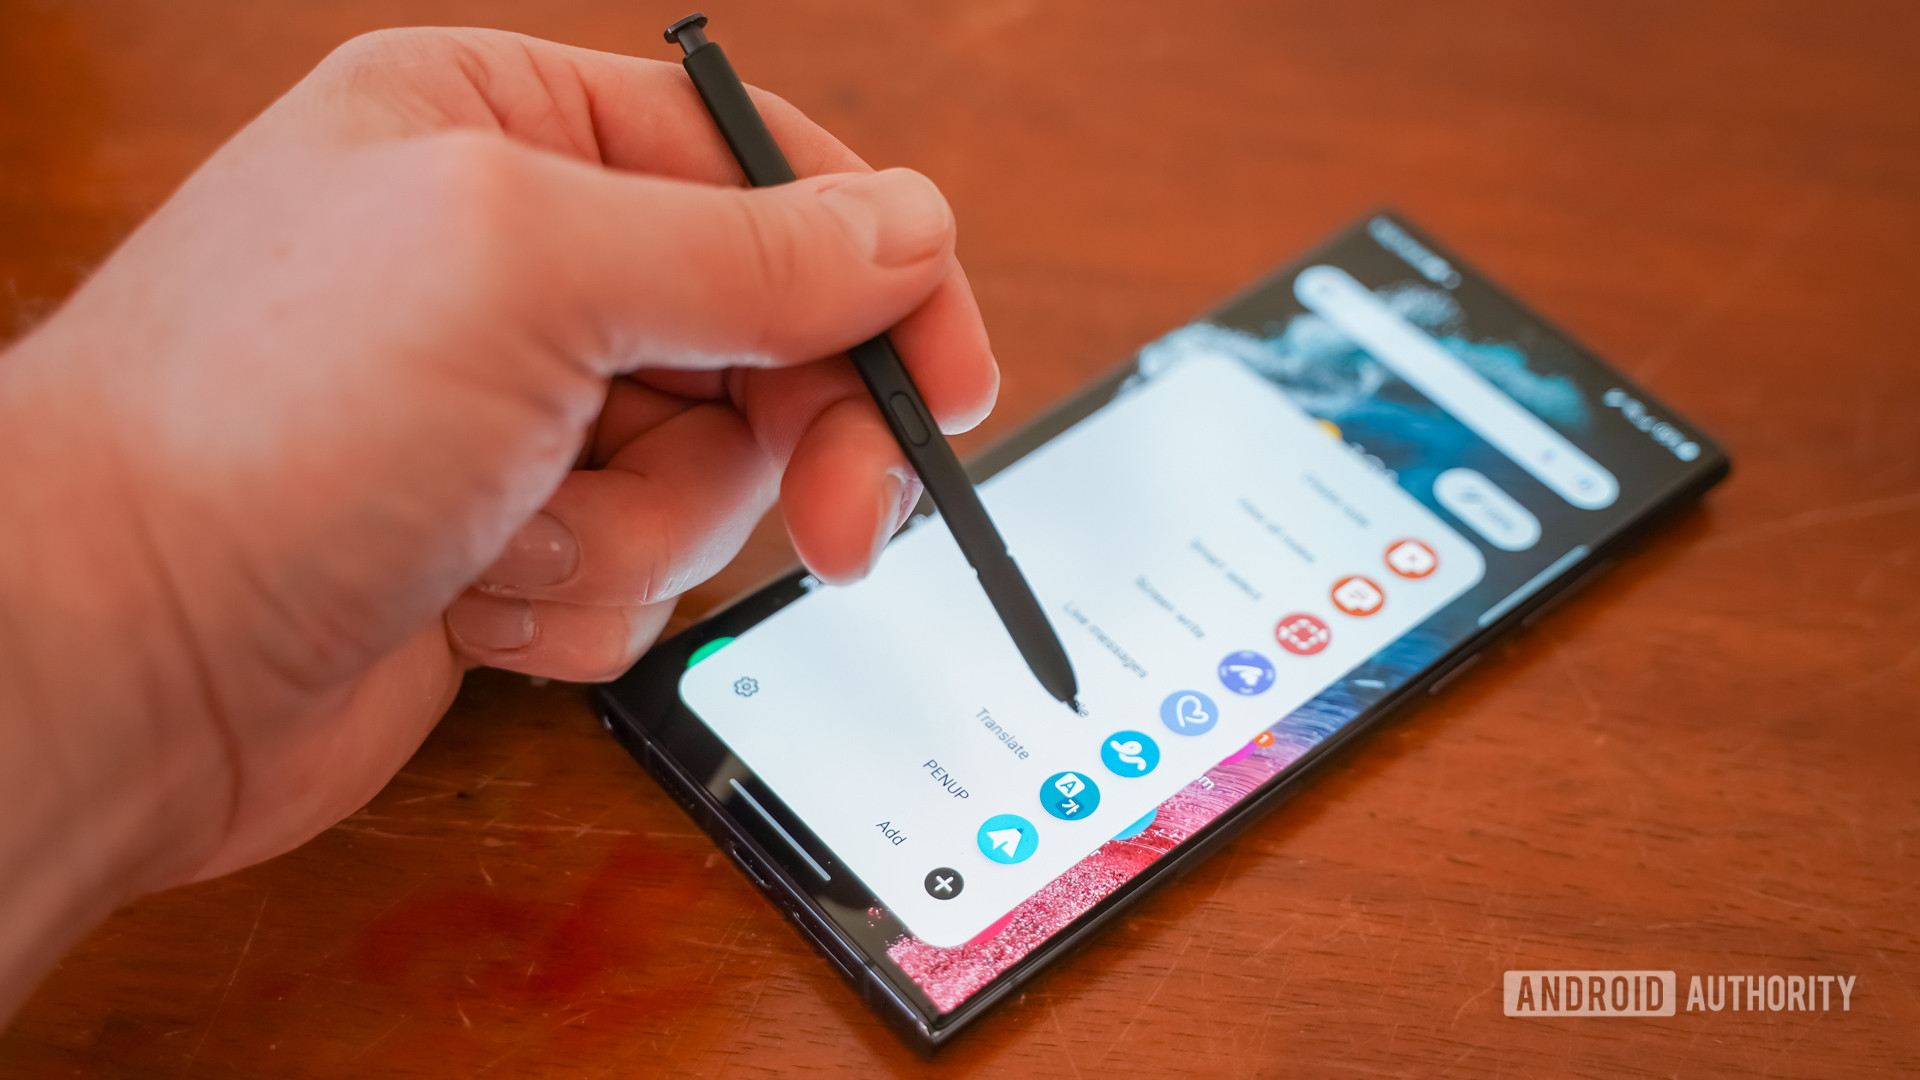 Voel me slecht koolhydraat galop 10 best stylus apps and S Pen apps for Android - Android Authority